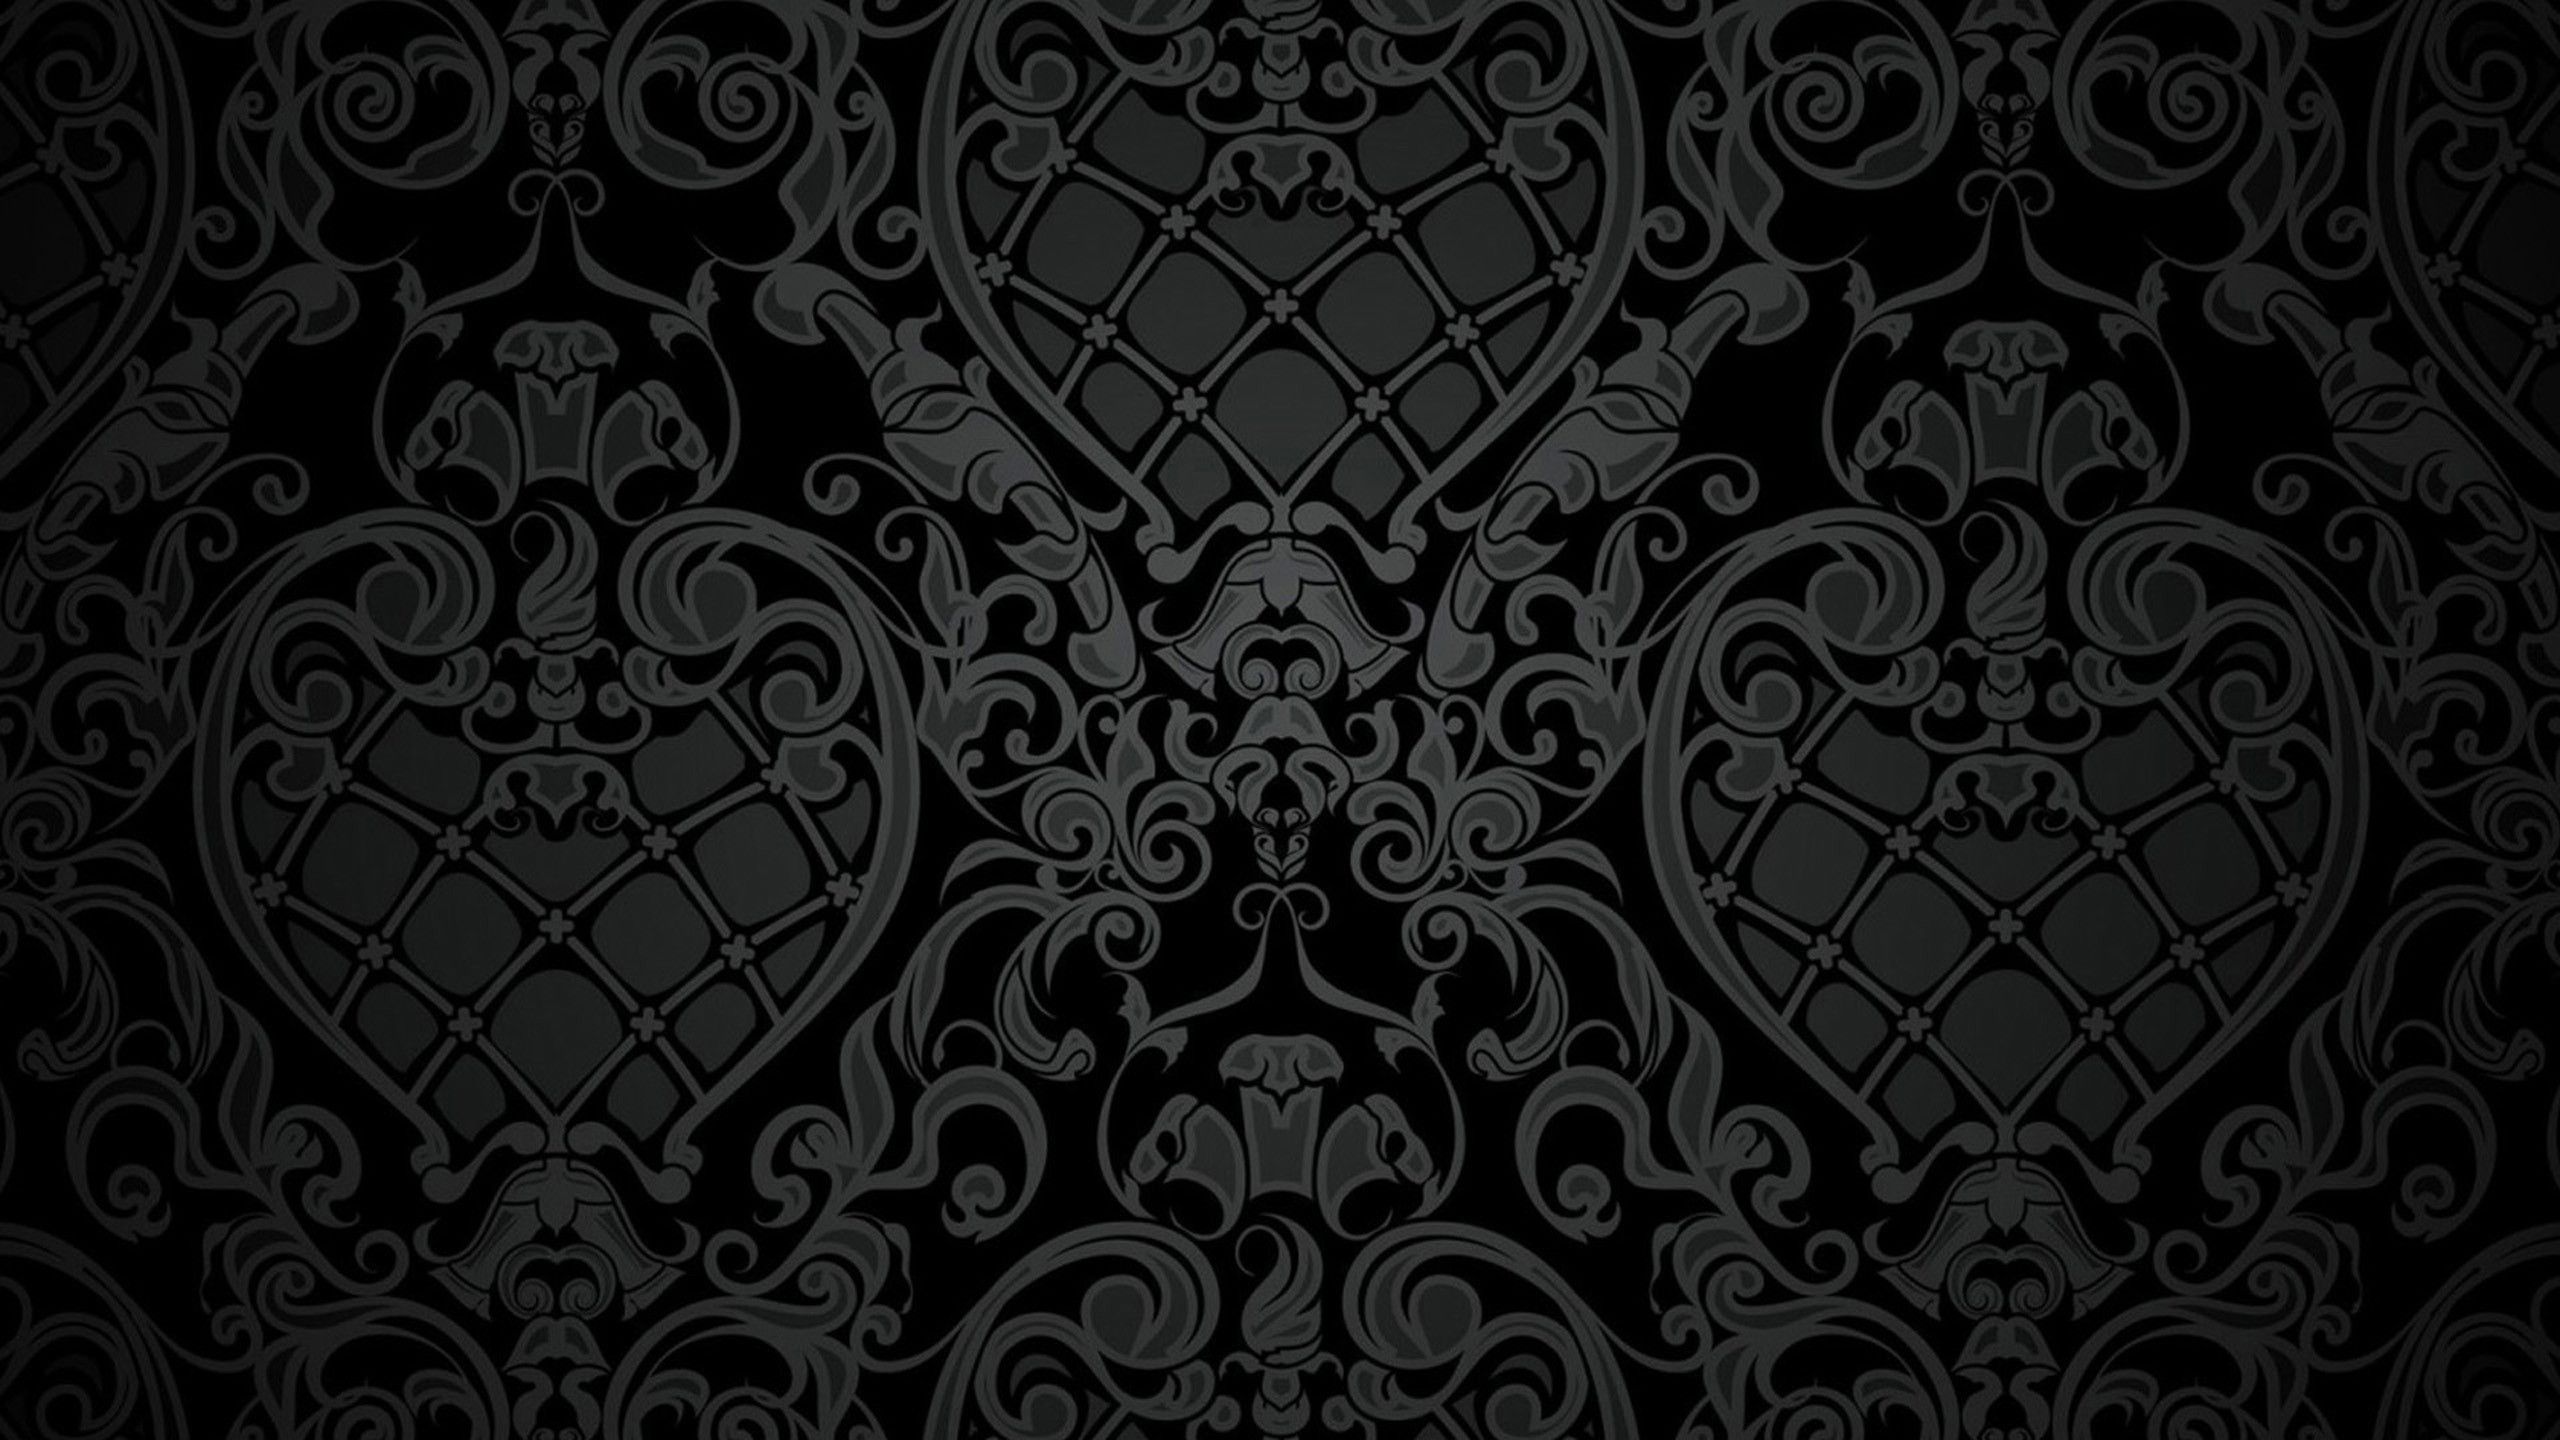 A black and white damask wallpaper - Gothic